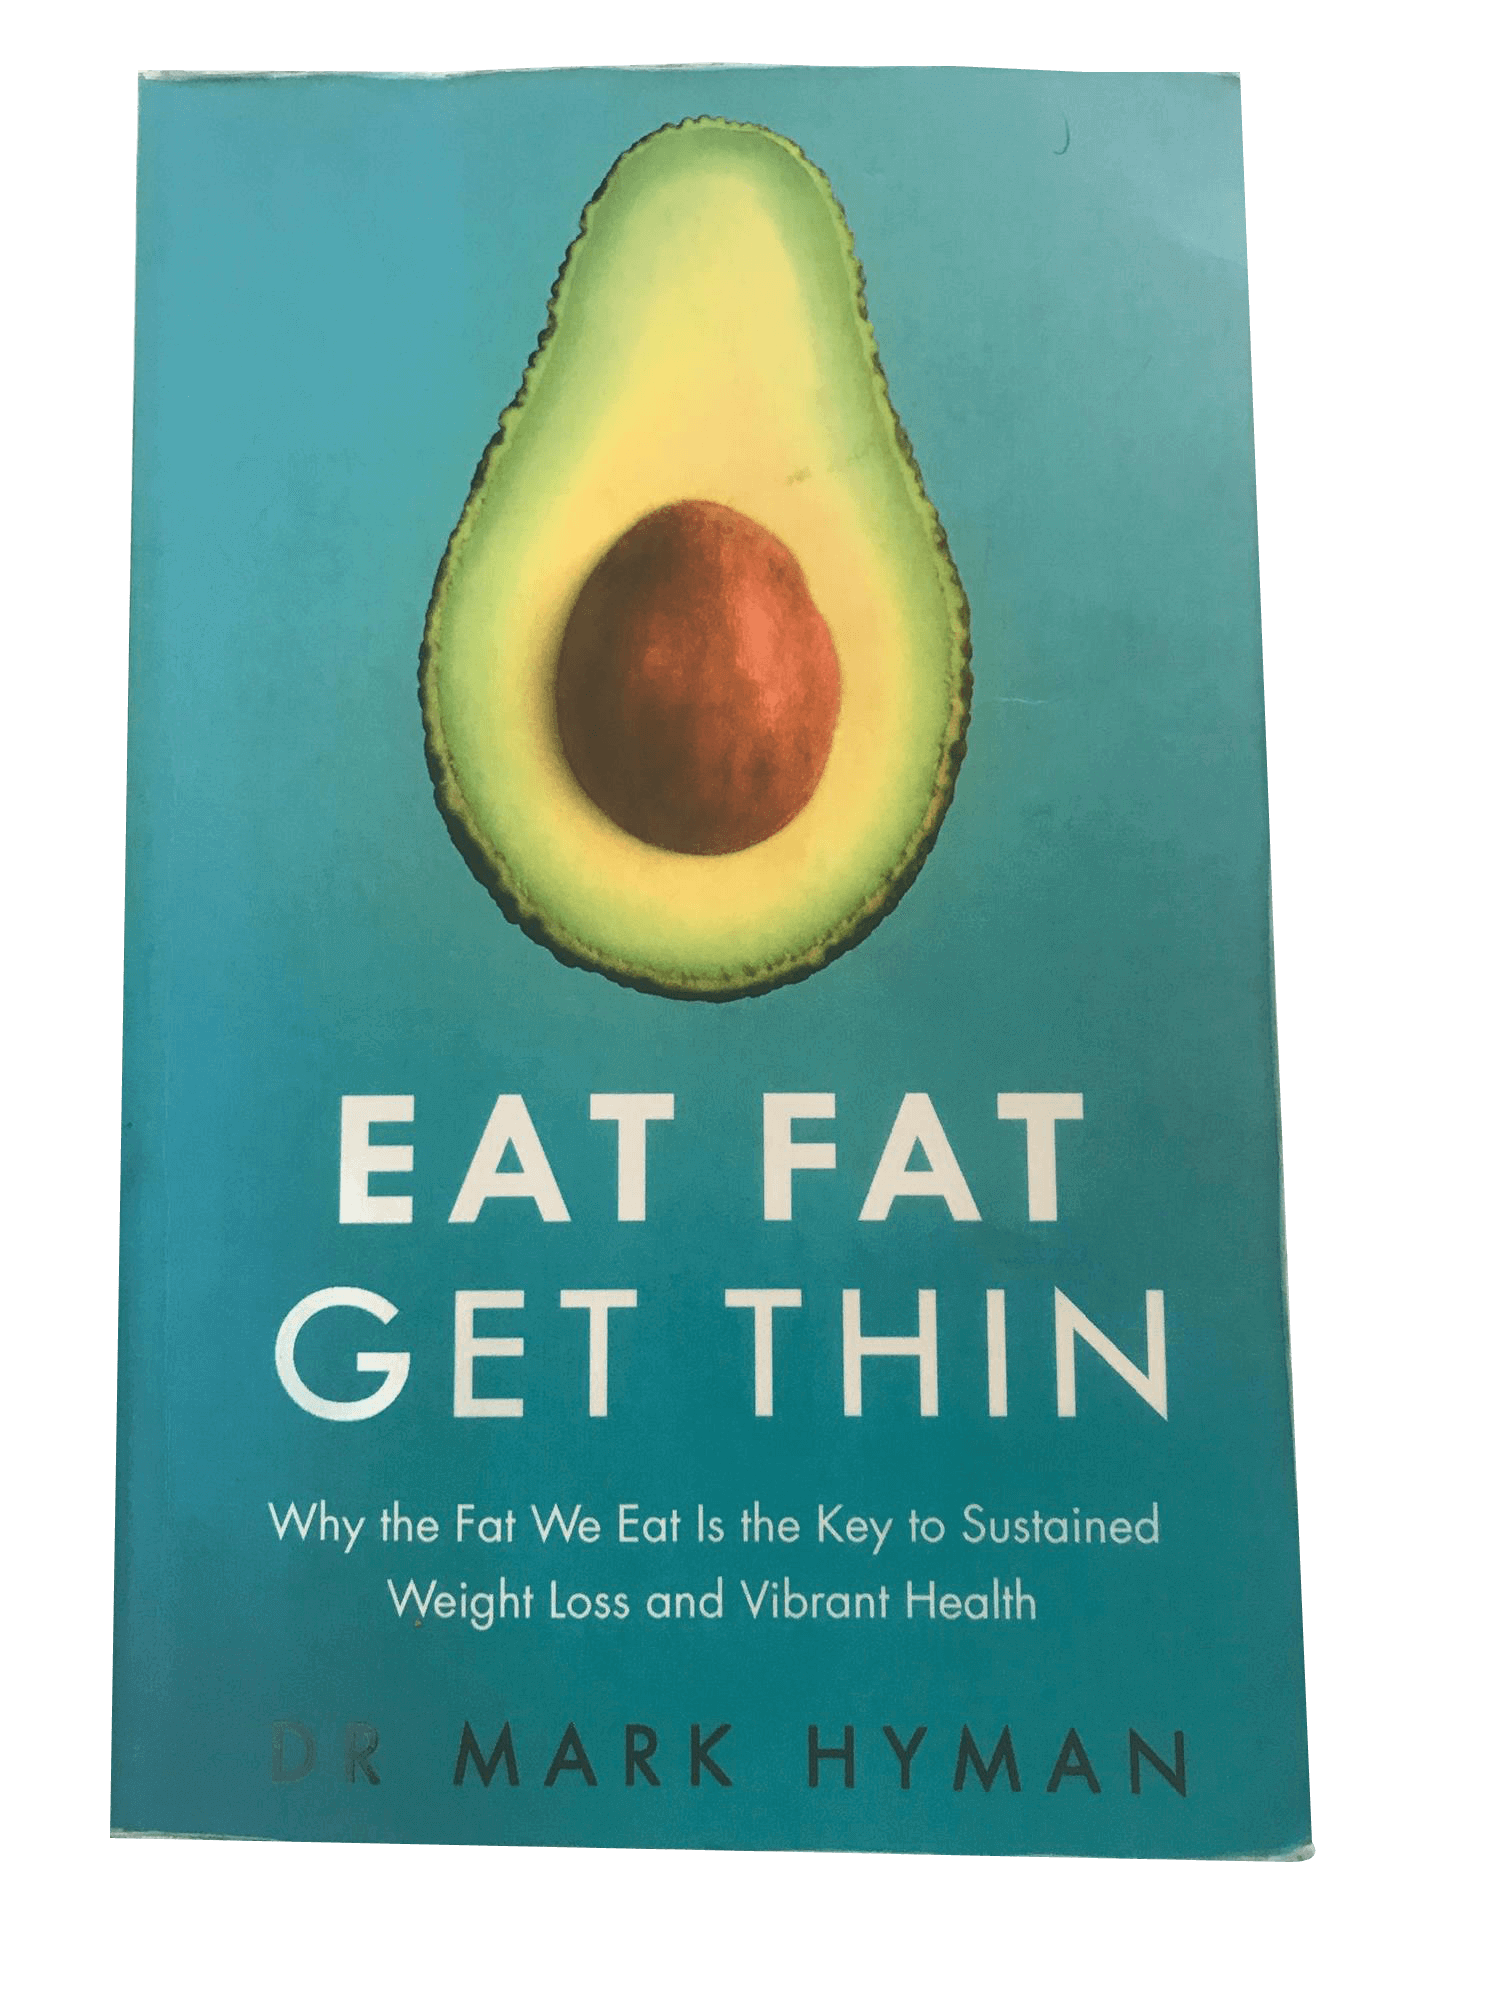 Eat fat get thin book cover